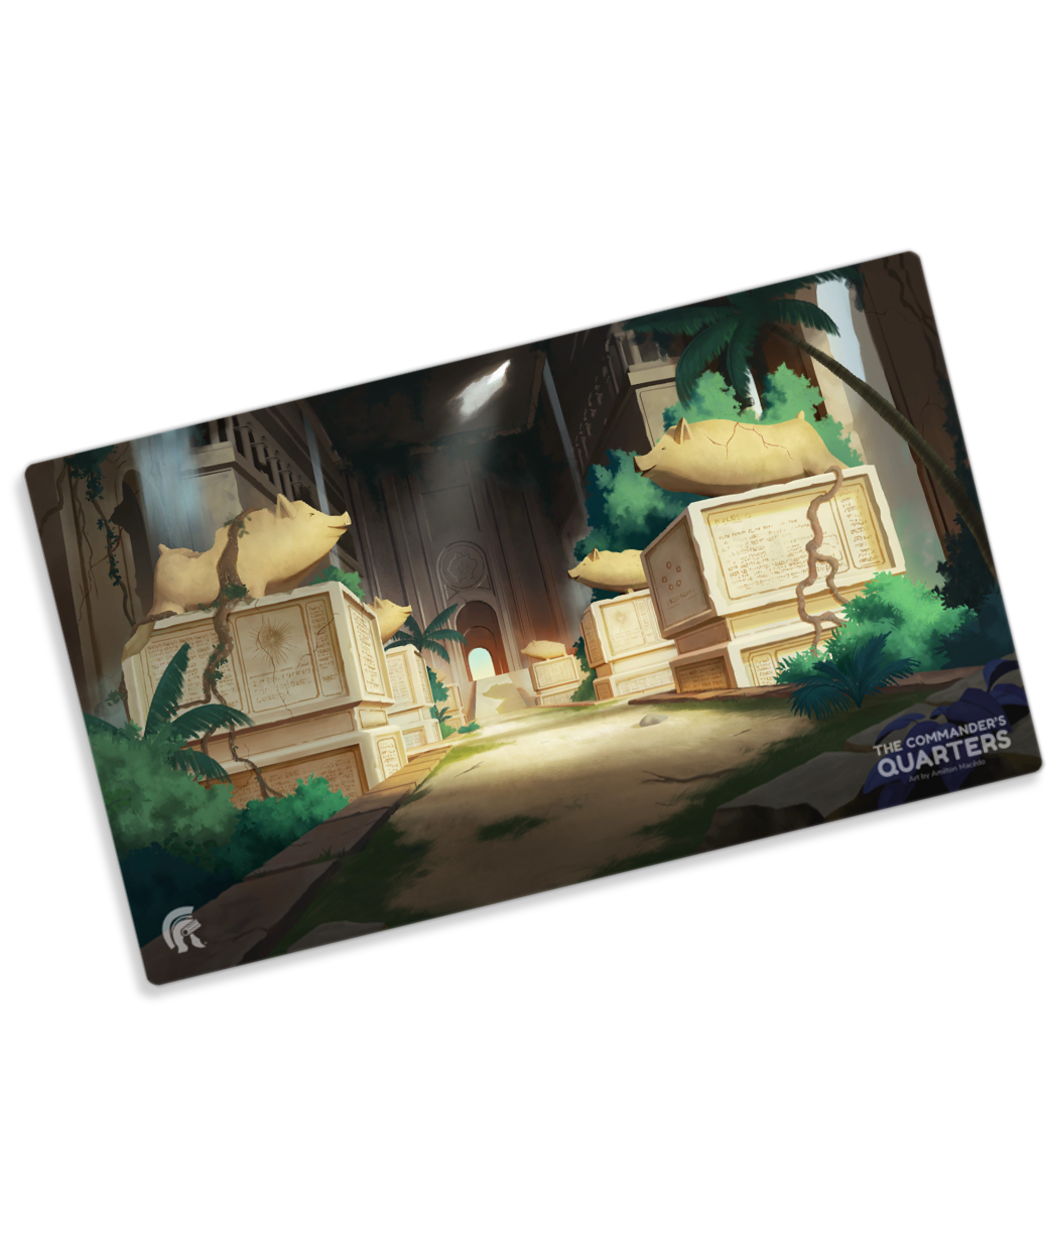 A rectangular playmat with curved edges showing an image of a grand hall with five visible gold pigs on pedestals. Vegetation grows throughout the old hall showing its age with a hole in the ceiling. “The Commander’s Quarters” is in gray sans serif font - from the Commander’s Quarters